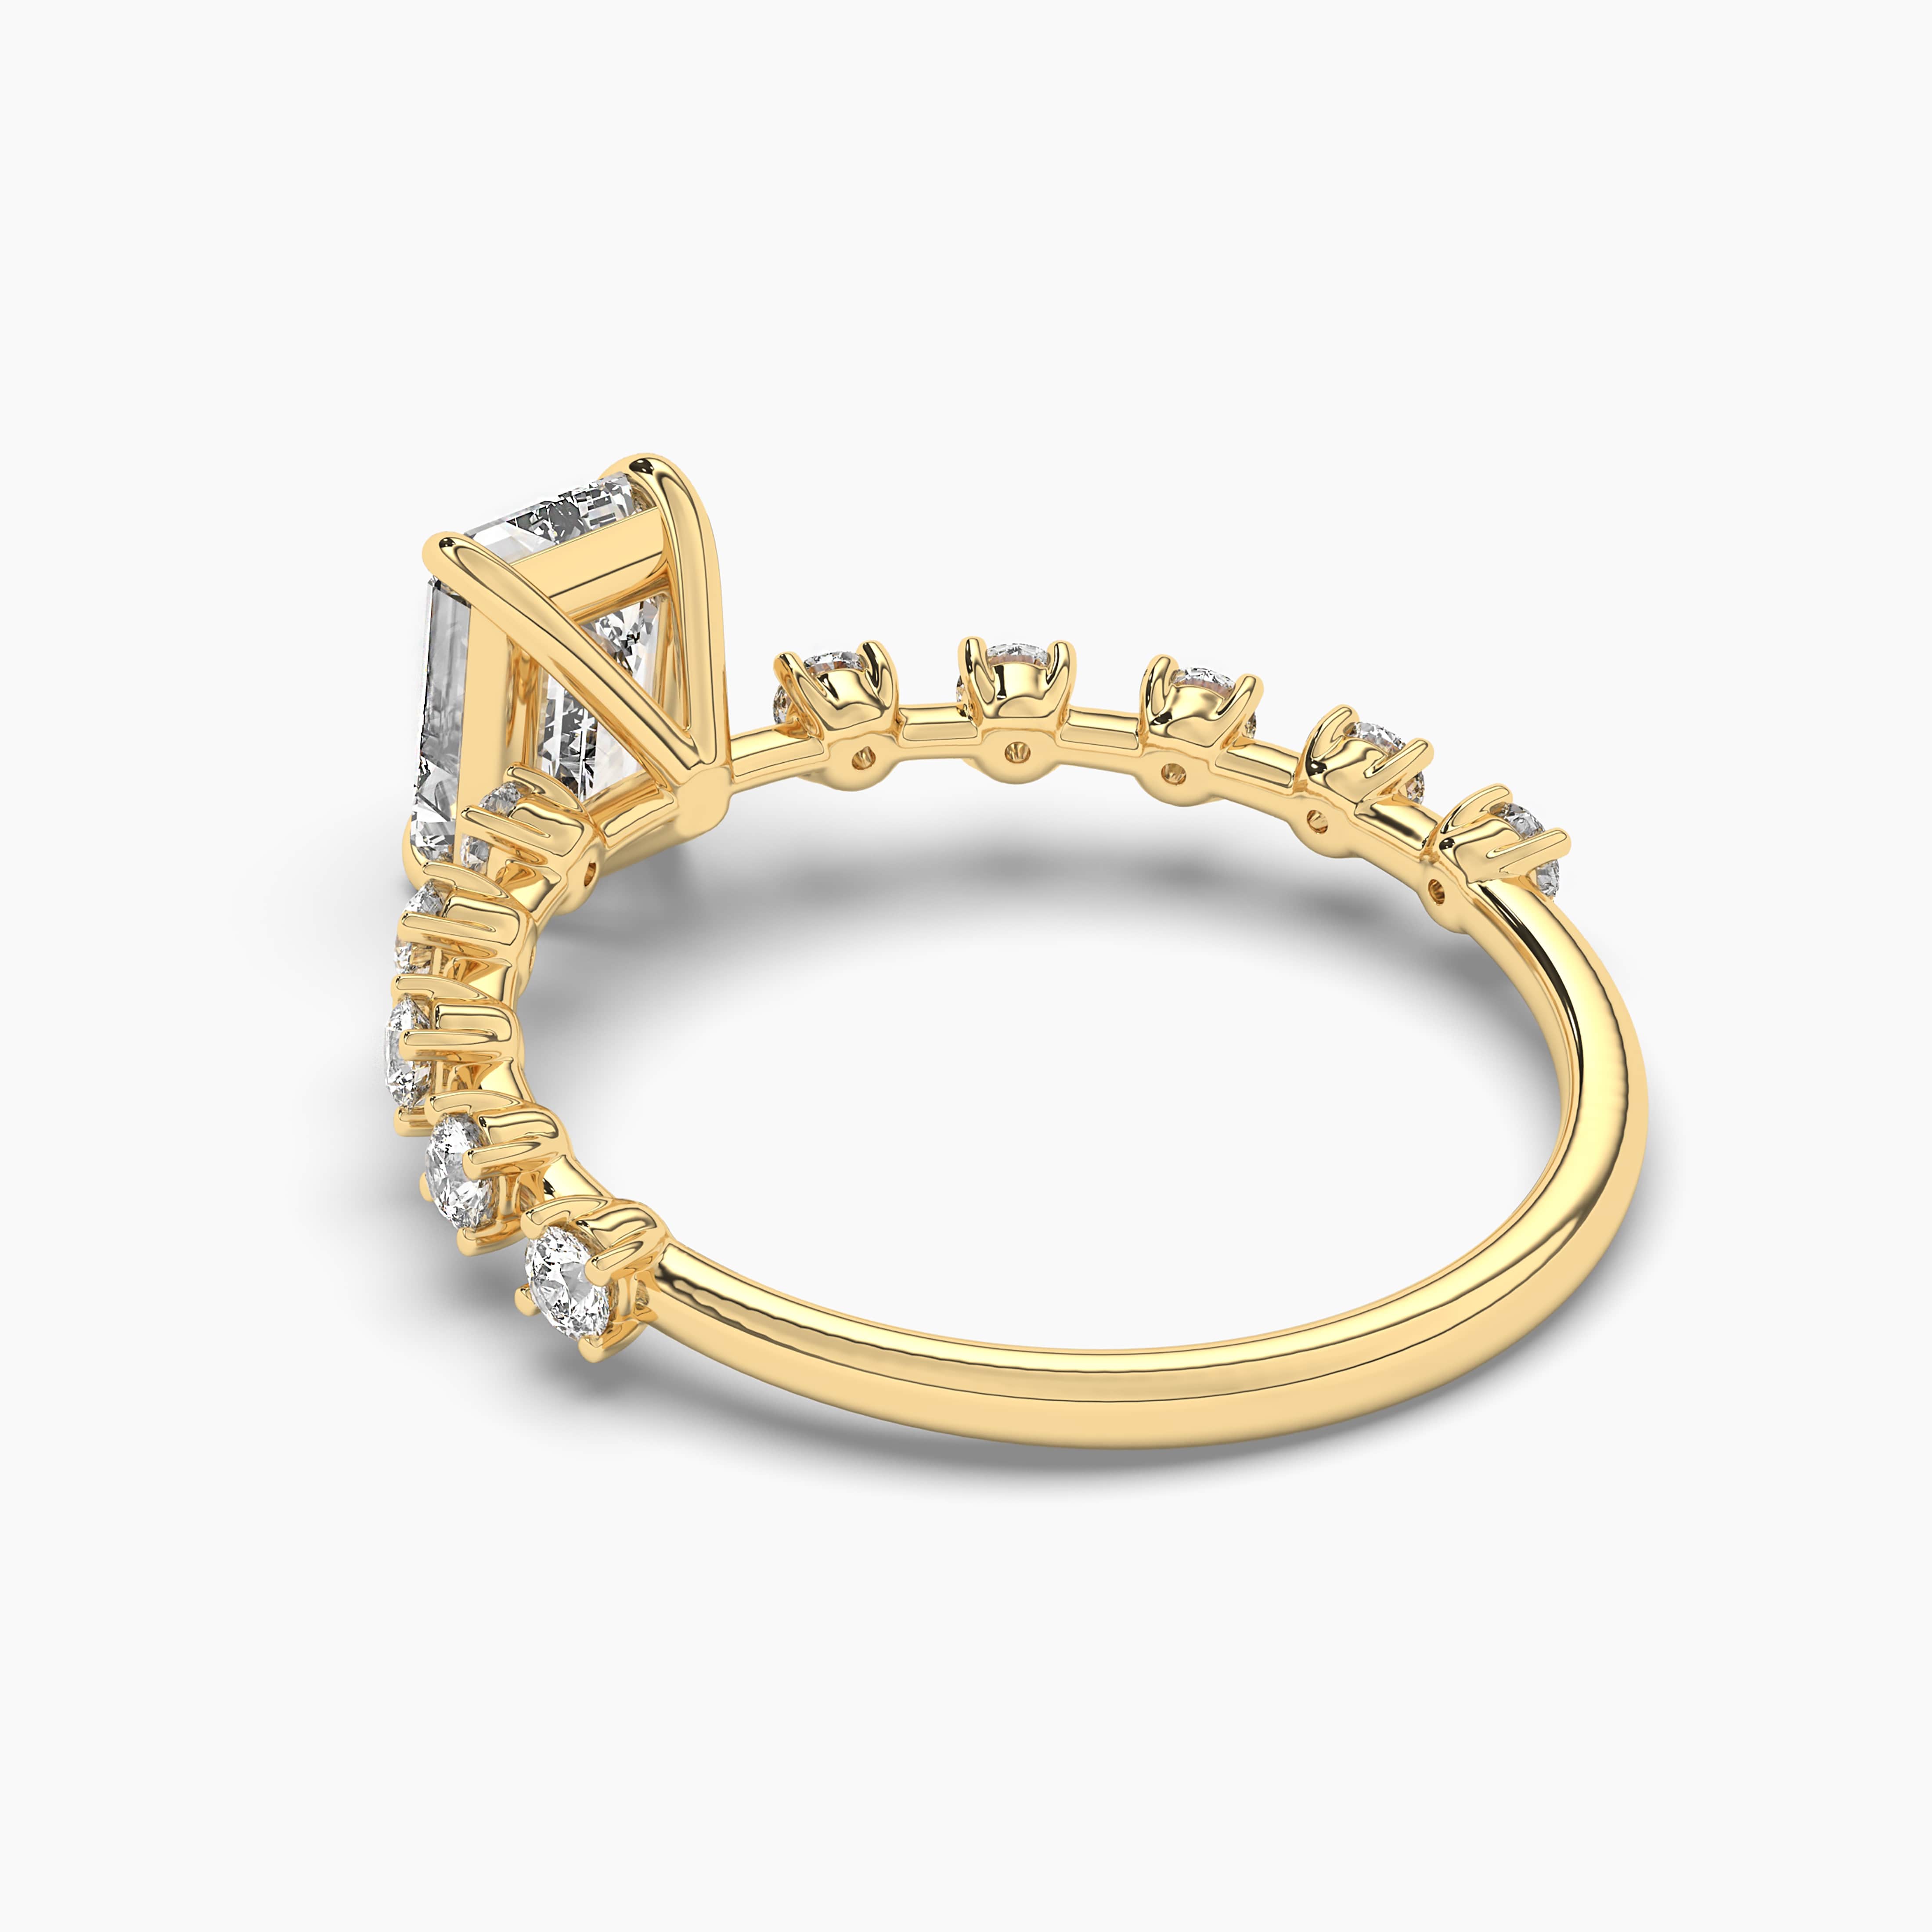 YELLOW GOLD SPLIT SHANK RING WITH EMERALD CUT SAPPHIRE AND DIAMONDS